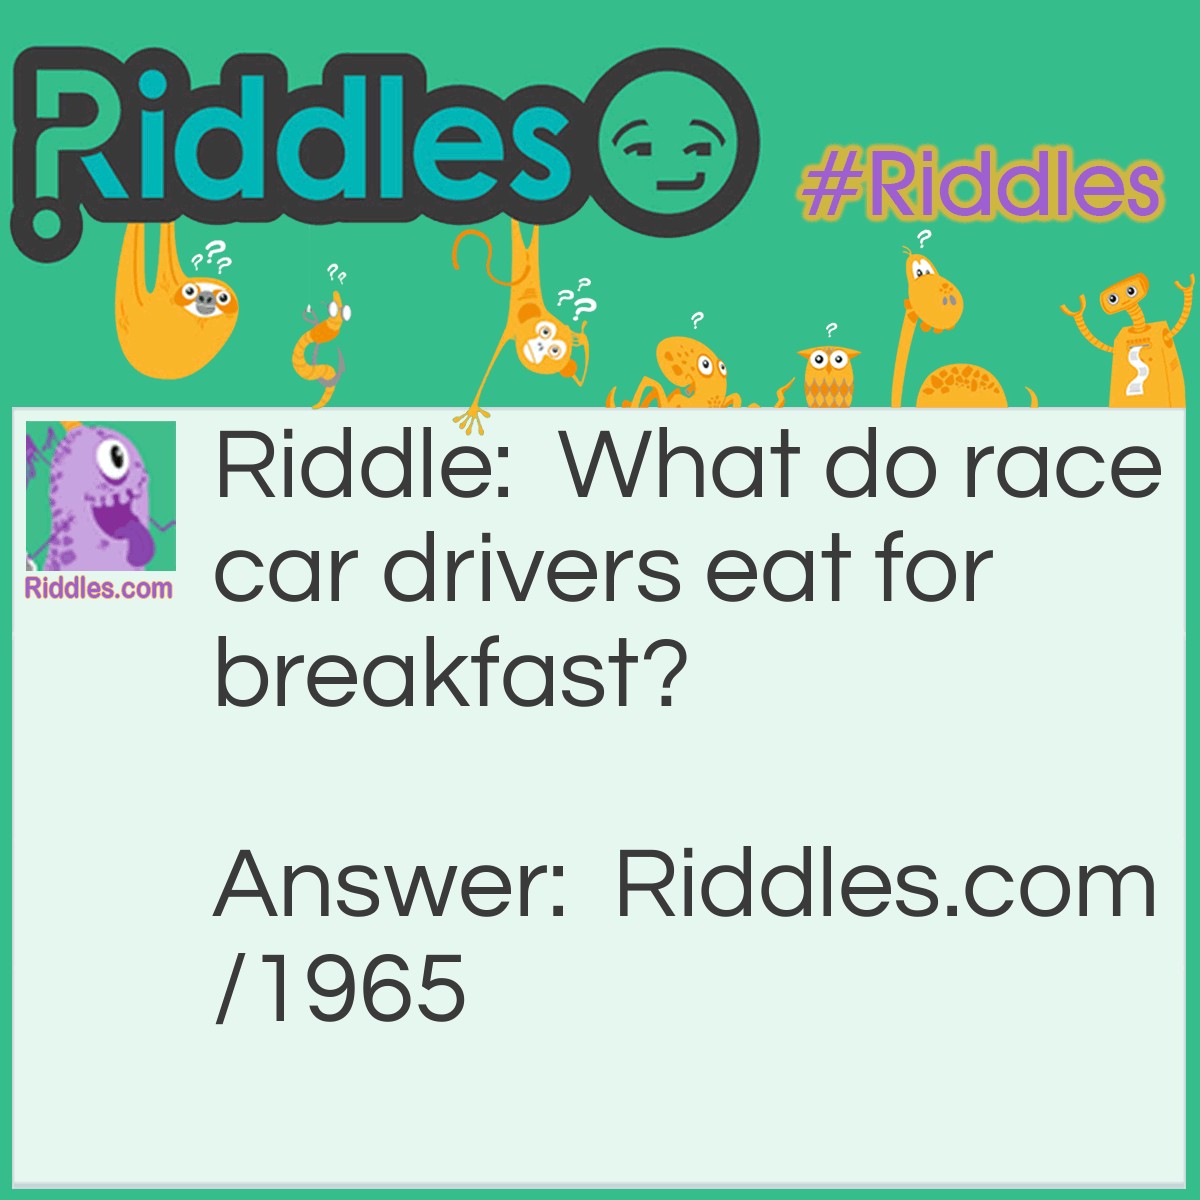 Riddle: What do race car drivers eat for breakfast? Answer: Fast food.